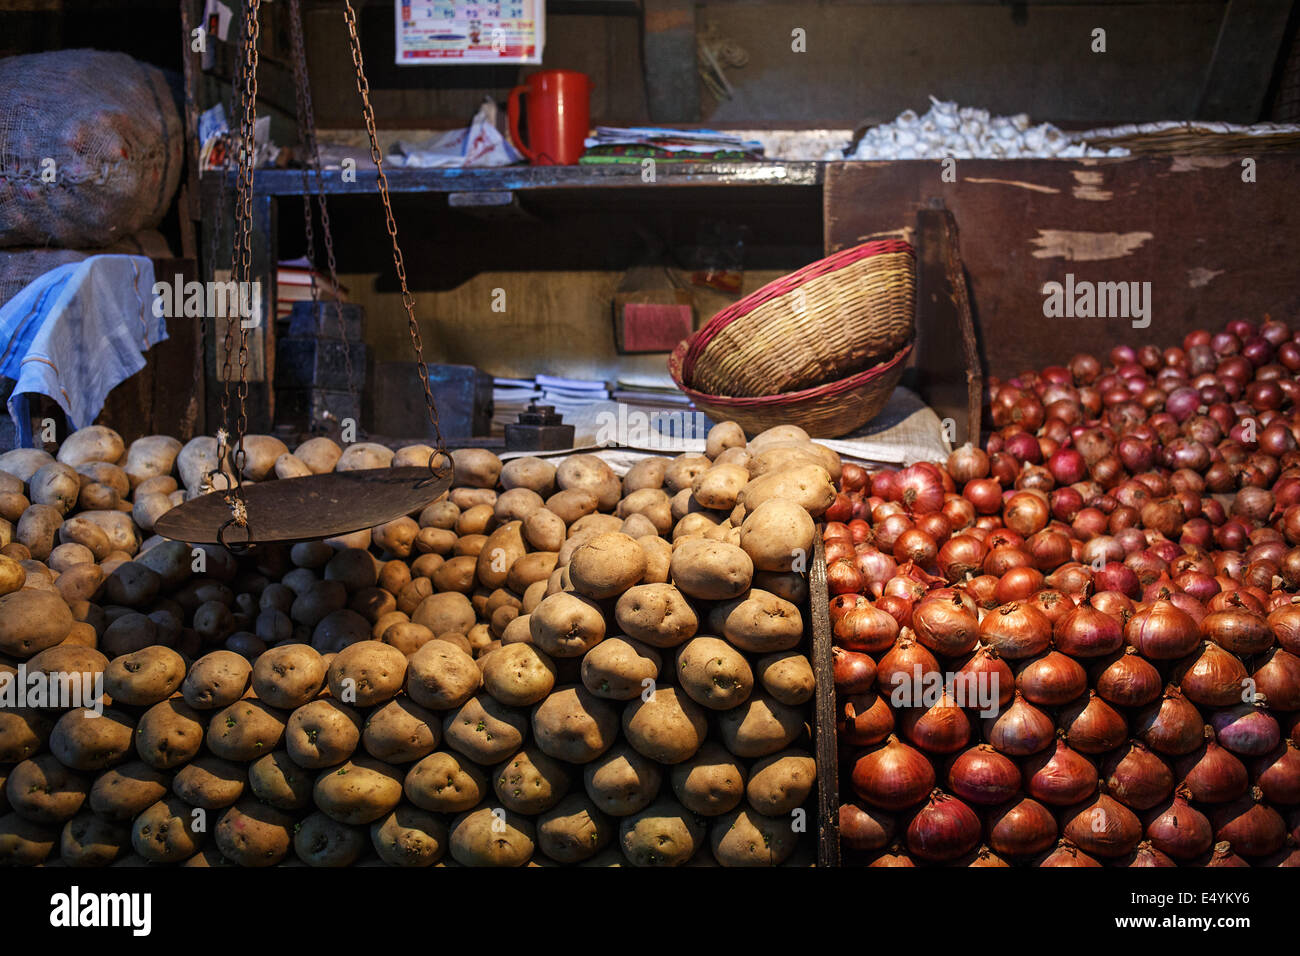 Onions and potatoes for sale at vegetable market in Dadar, Mumbai. Stock Photo